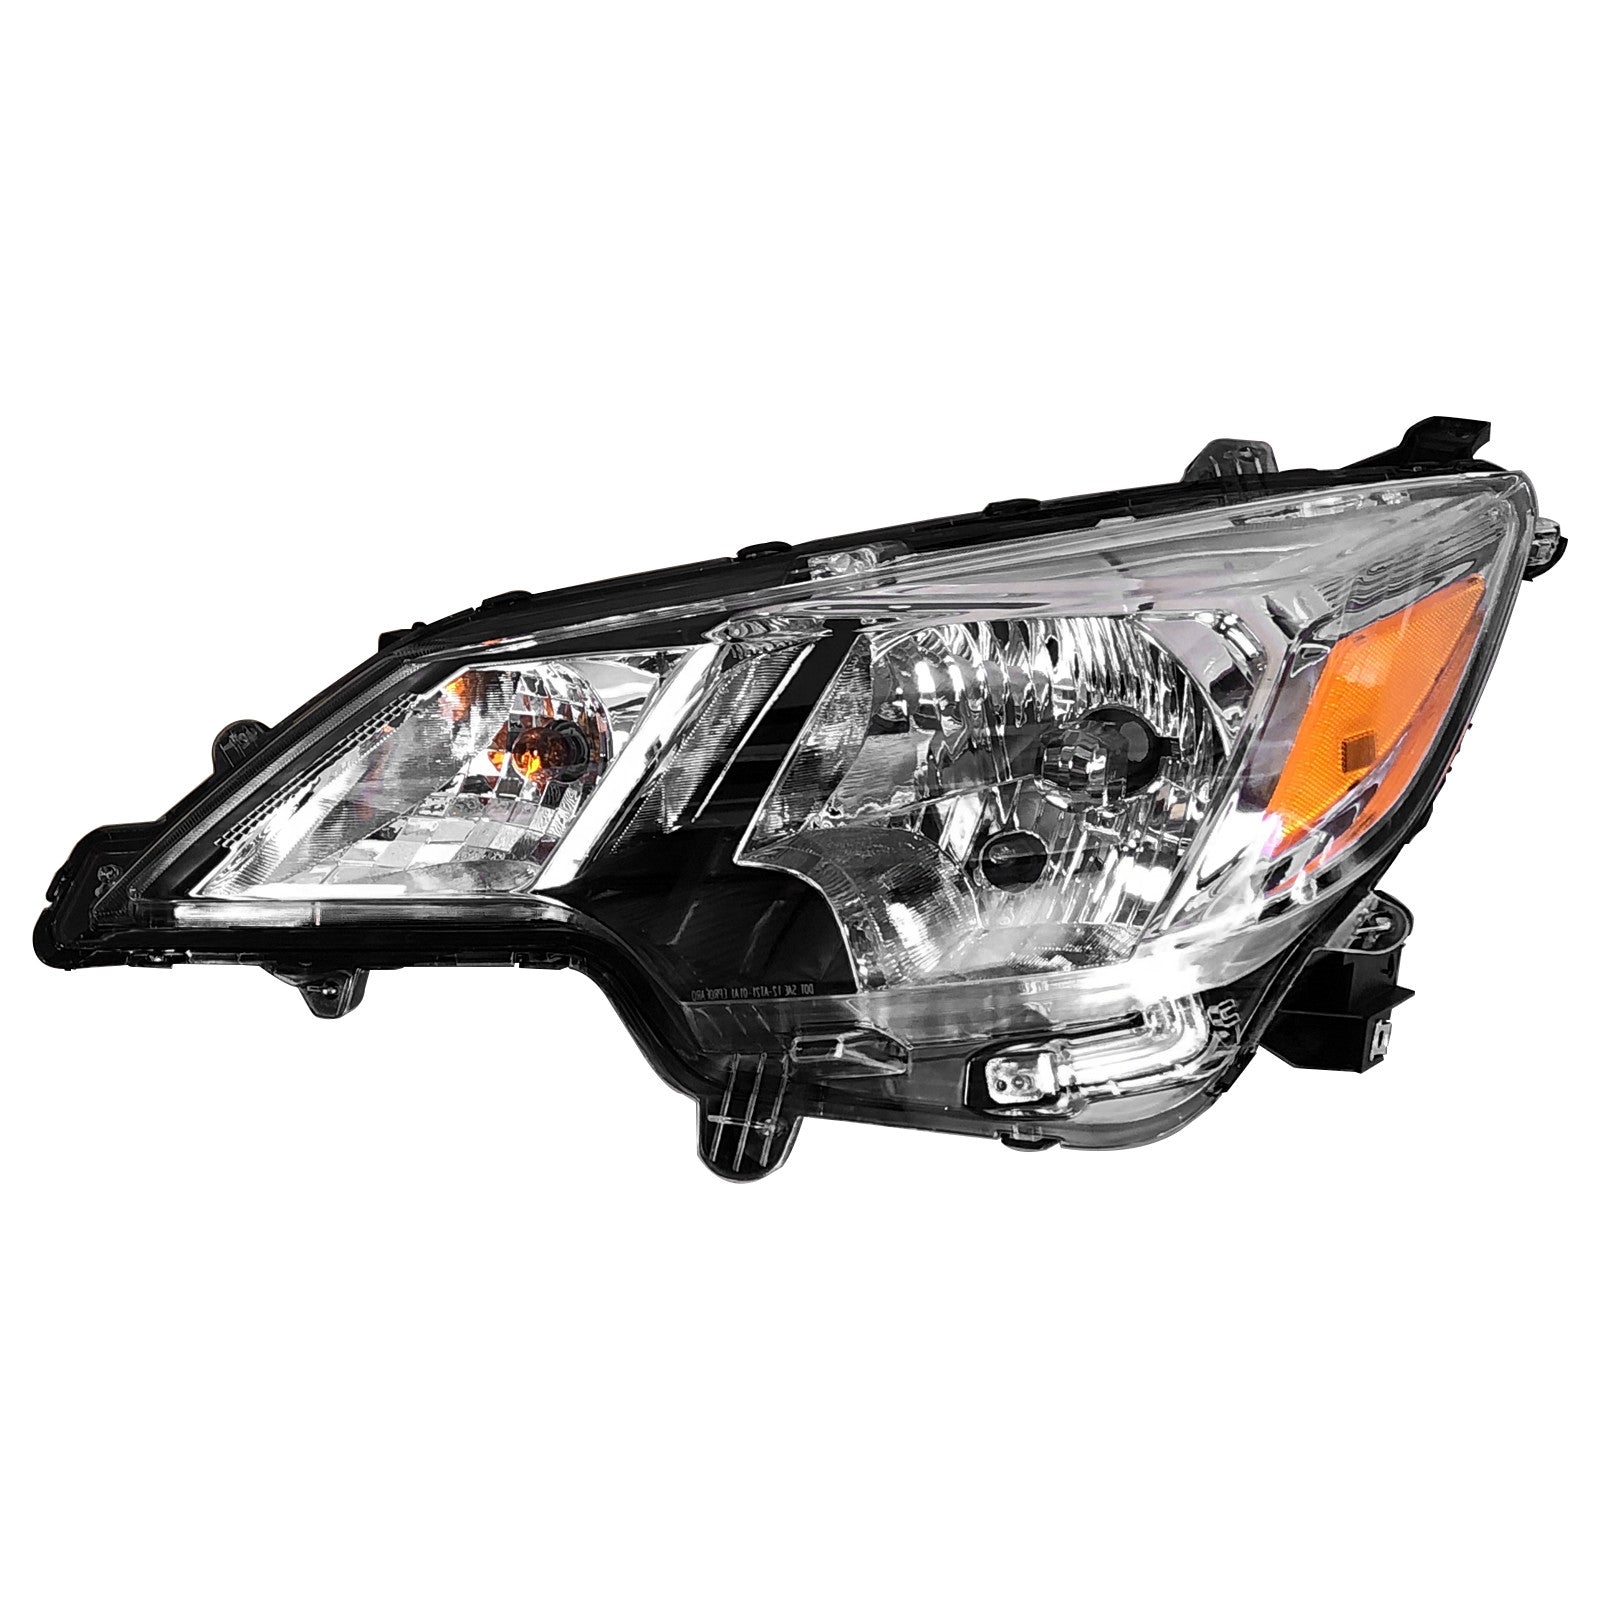 2021 2022 2023 Mitsubishi Mirage G4 Headlight Headlamp Assembly Driver Side  by Automoded